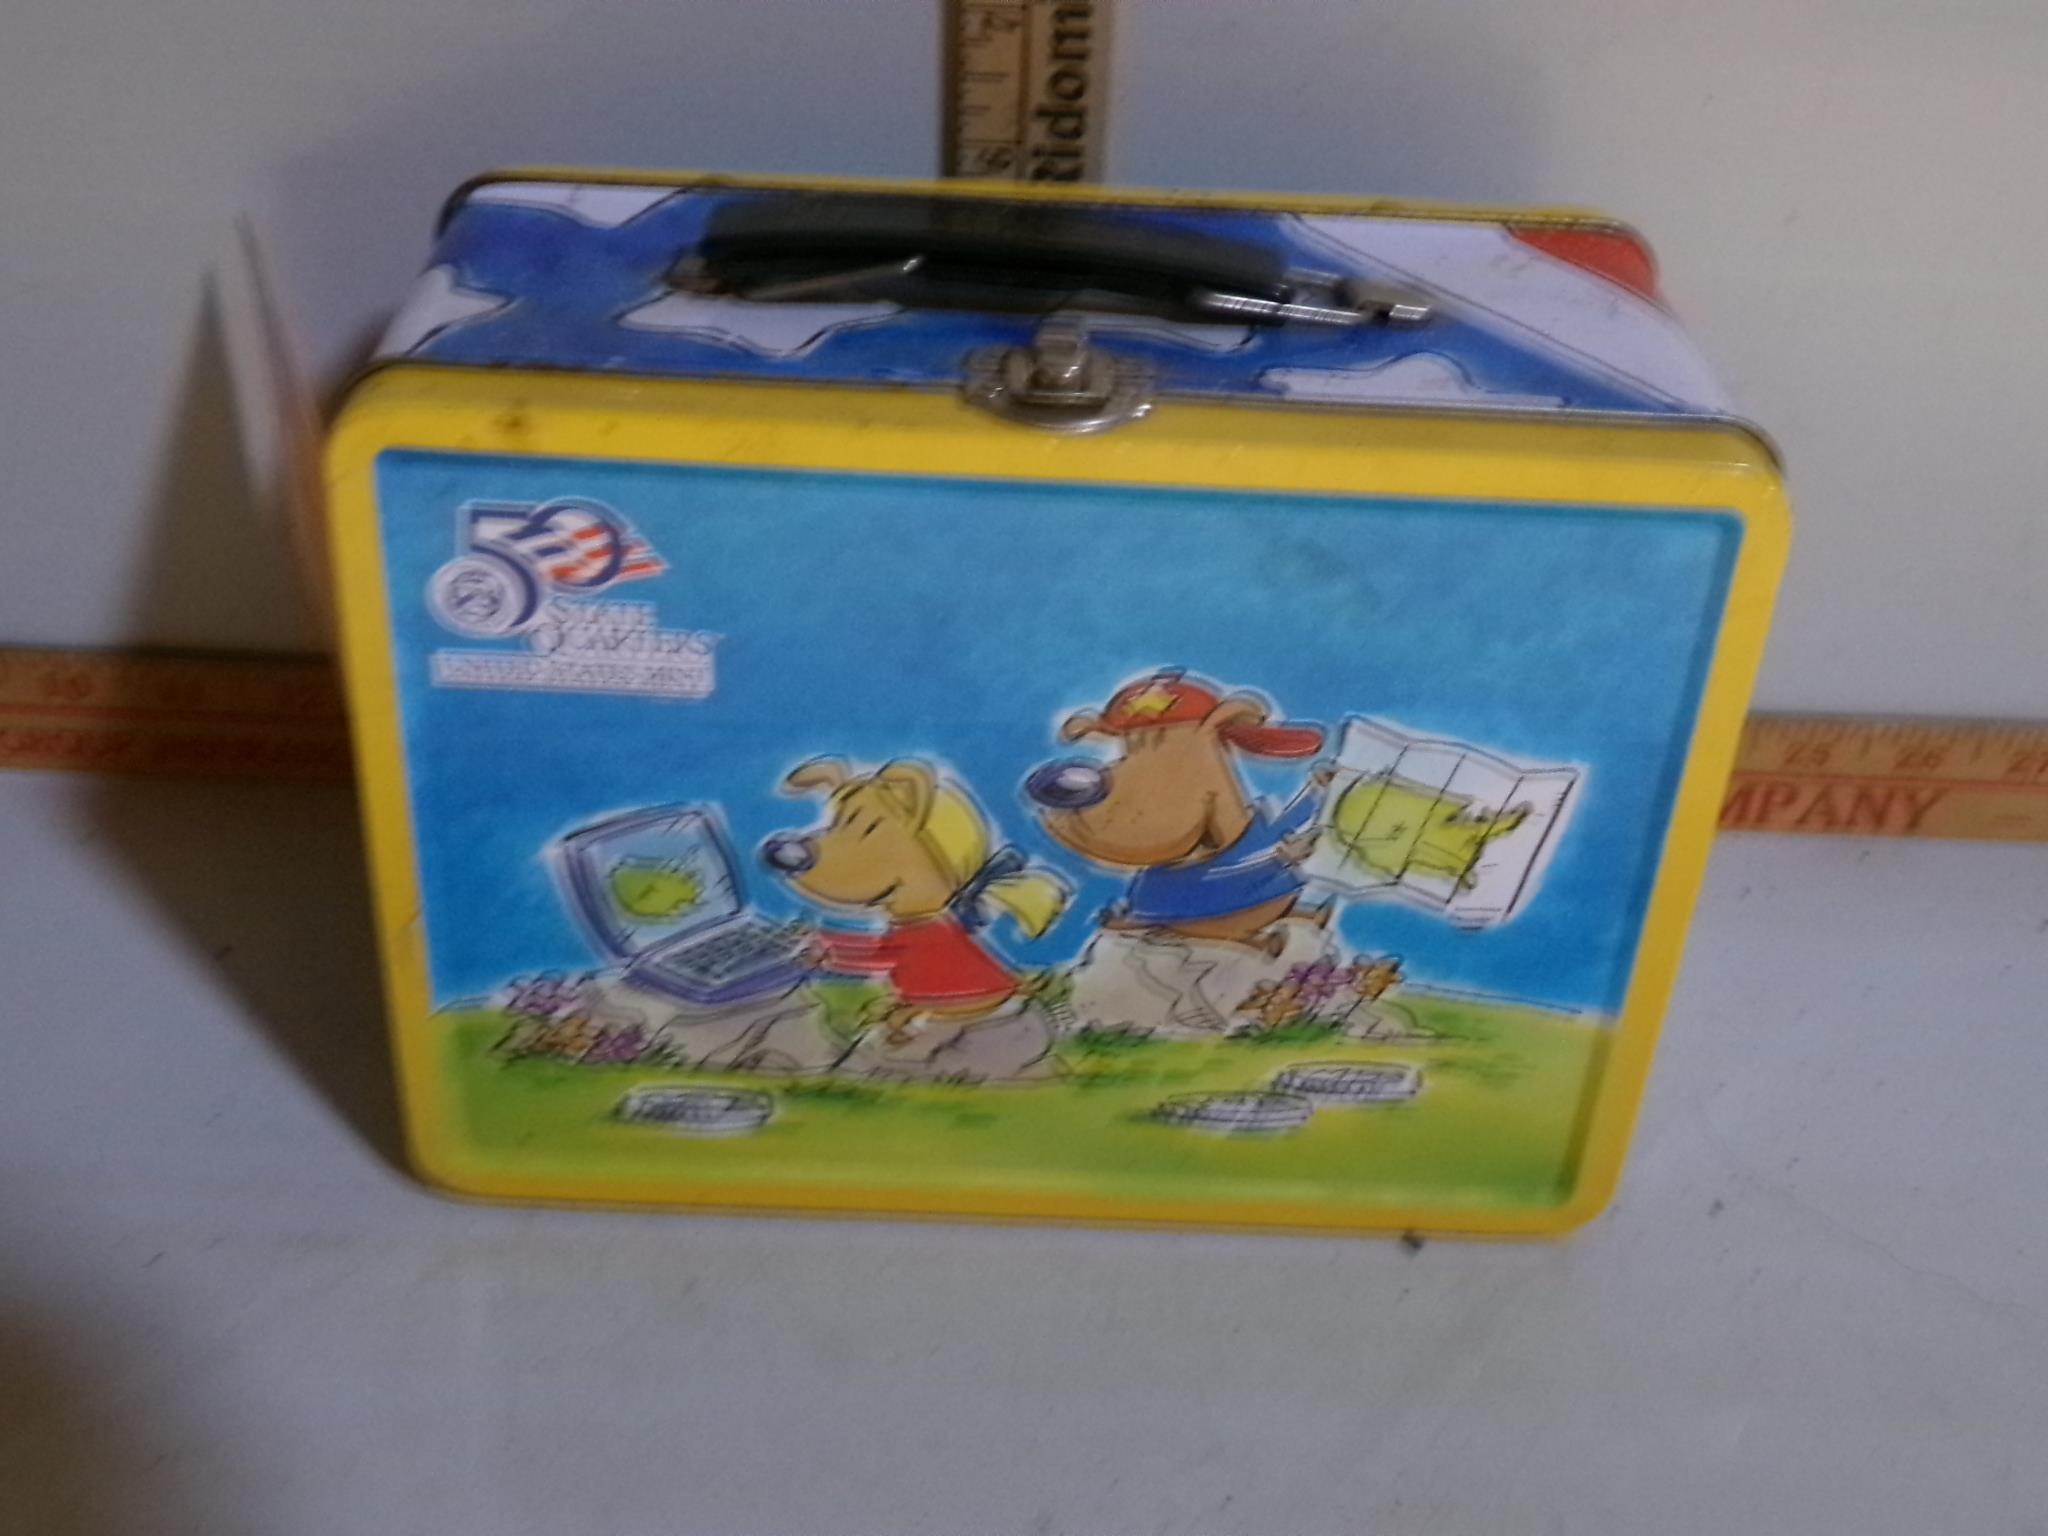 50 State Quarters Lunch Box with